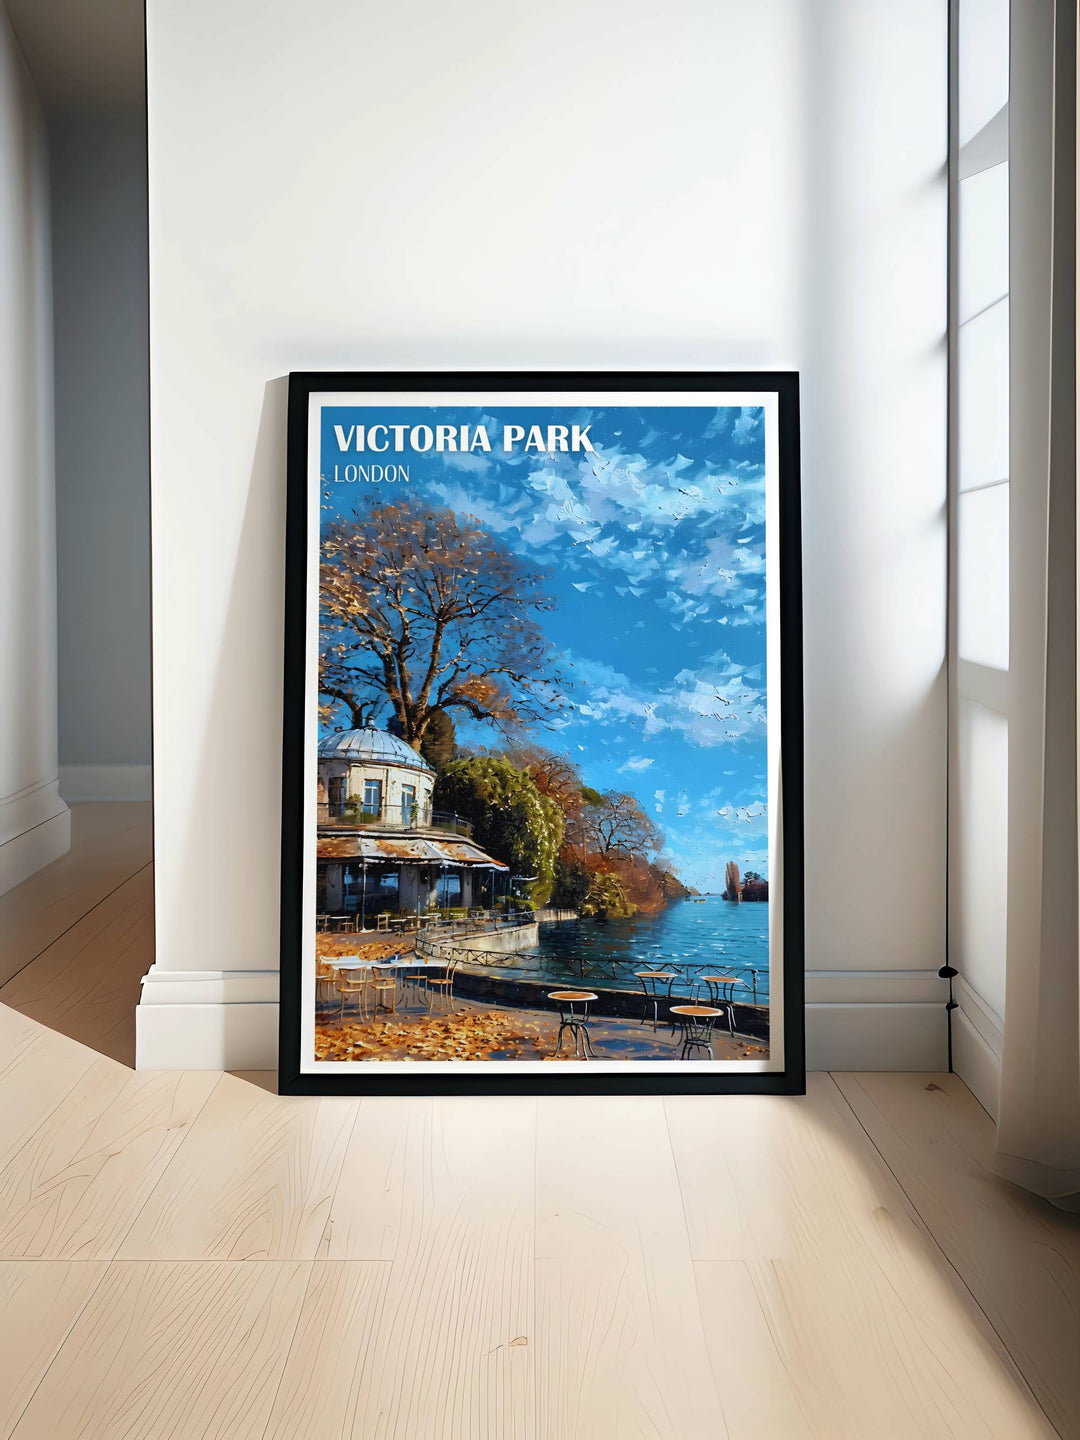 Modern wall decor of Victoria Park showcasing the Pavilion Café, capturing the serene ambiance of this iconic London park in vibrant colors and intricate details.